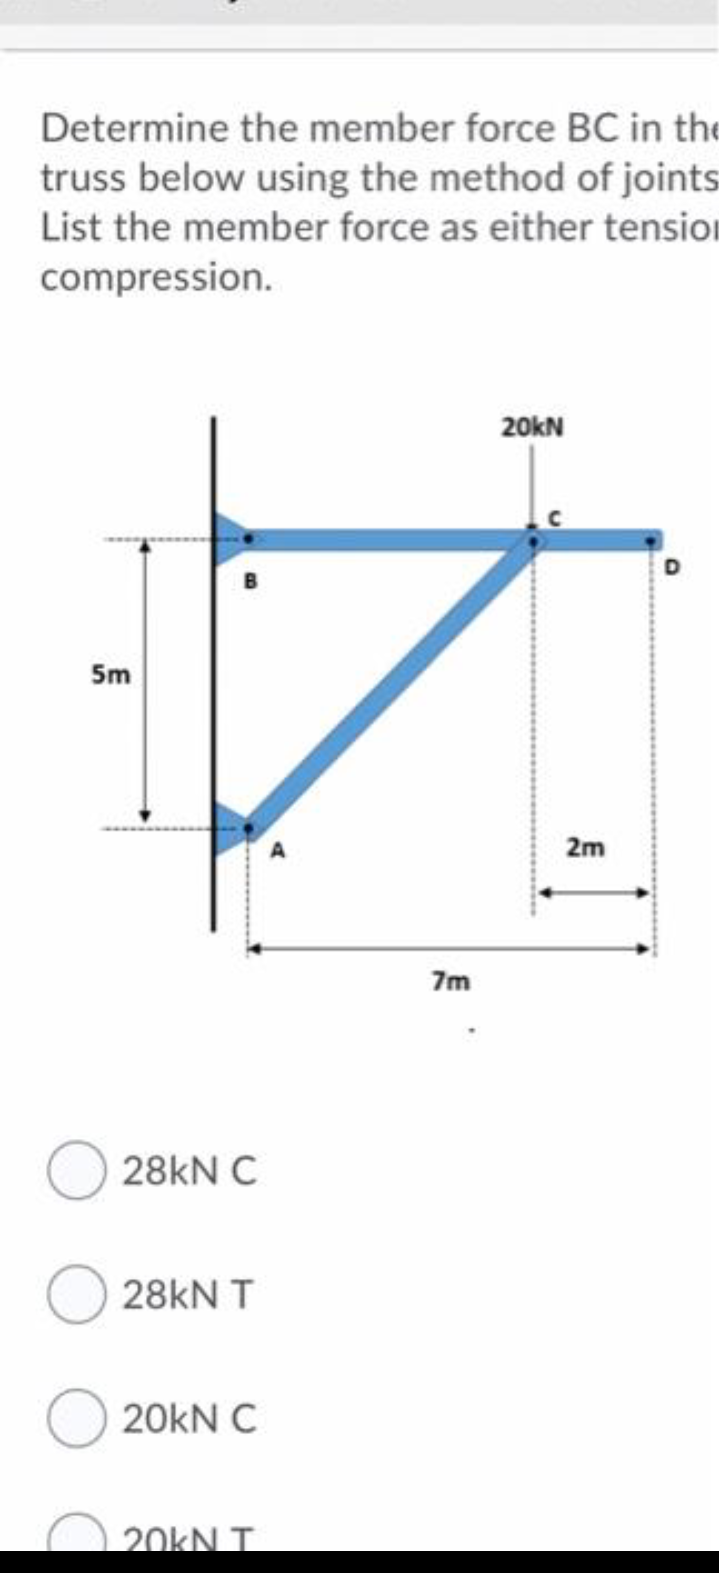 Determine the member force BC in the
truss below using the method of joints
List the member force as either tension
compression.
20kN
5m
2m
7m
28kN C
28kN T
20kN C
20KN T
